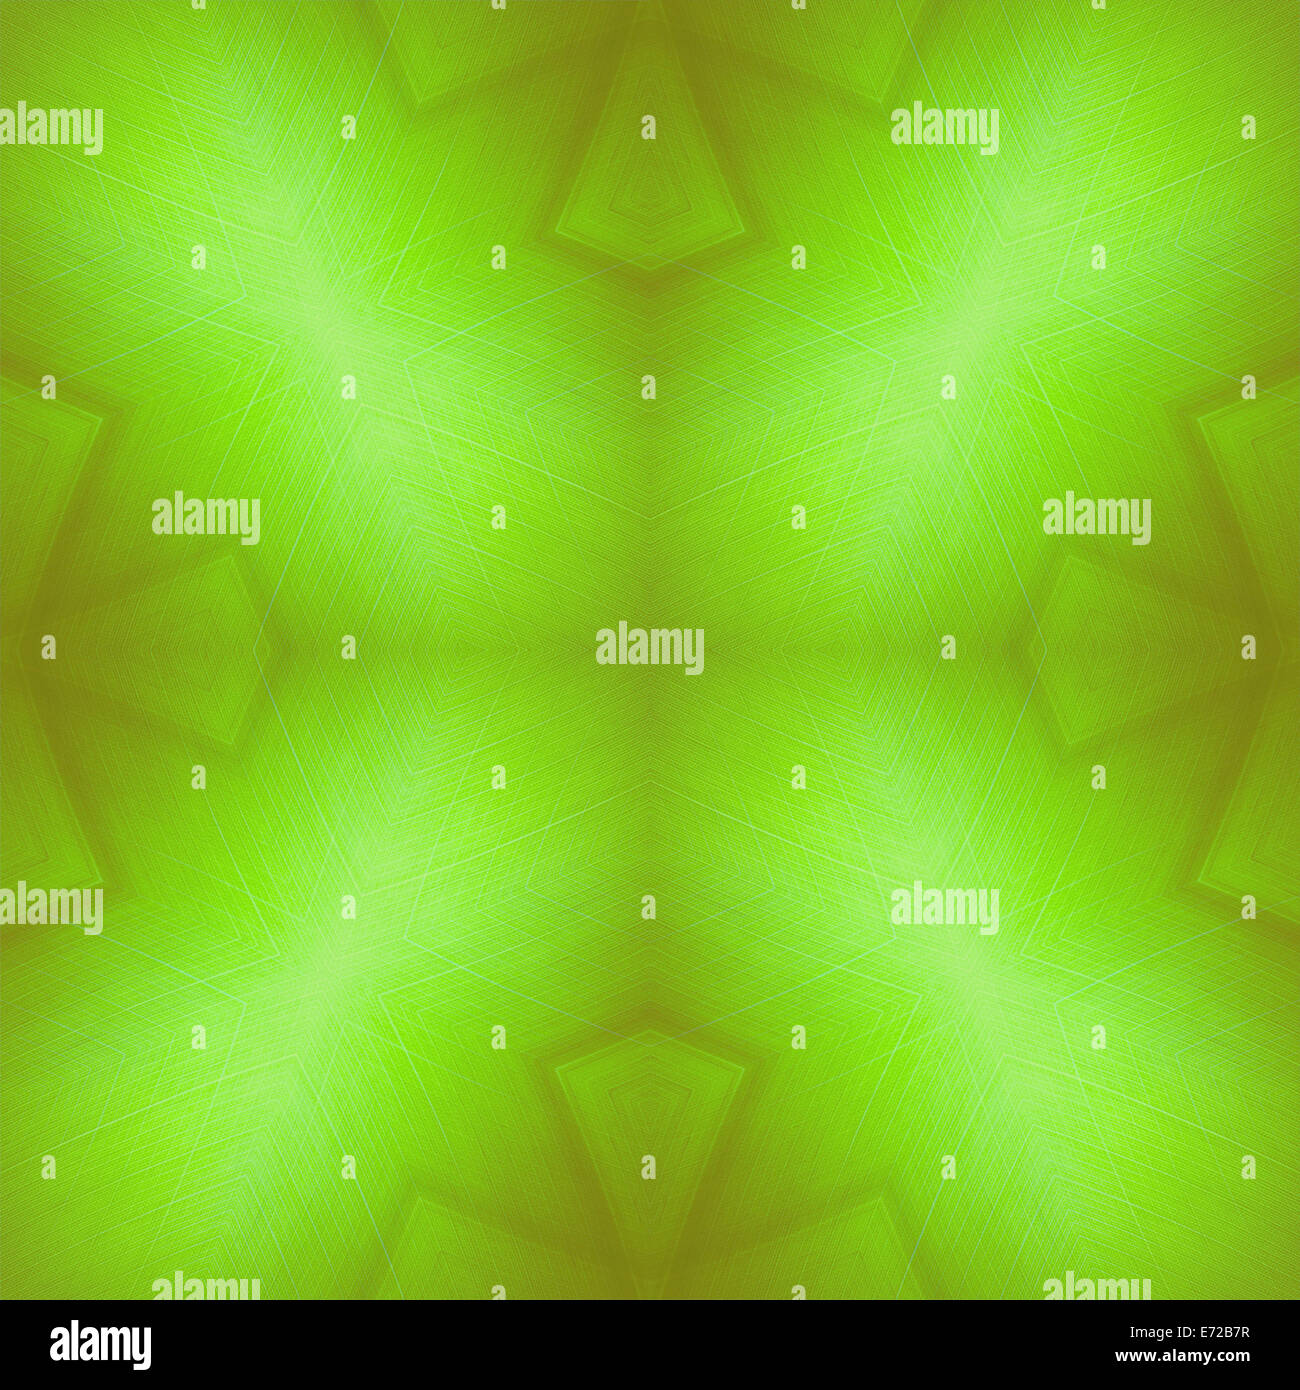 Green leaf seamless abstract texture background Stock Photo